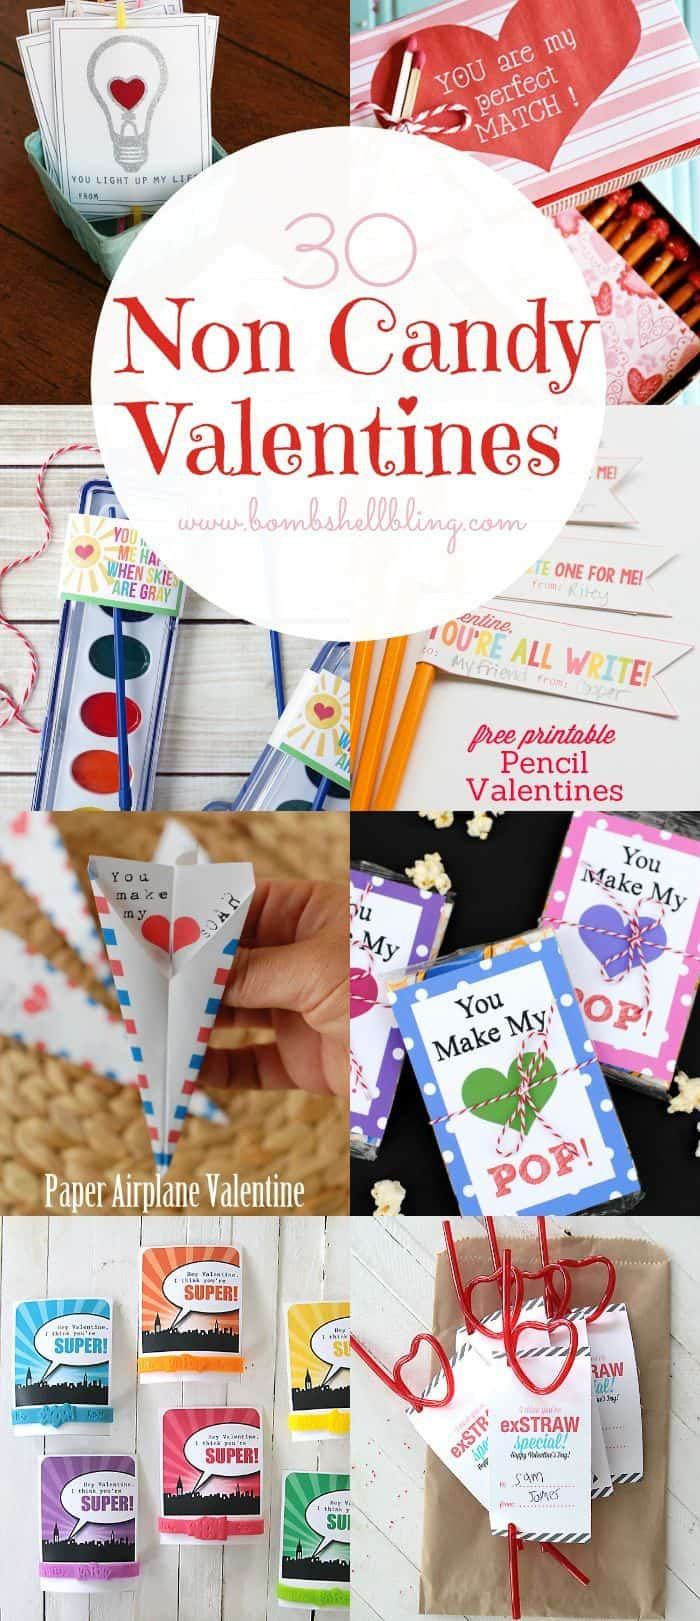 Valentine Gift Ideas For Kid
 10 Non Candy Valentine s Day Gift Ideas for Kids